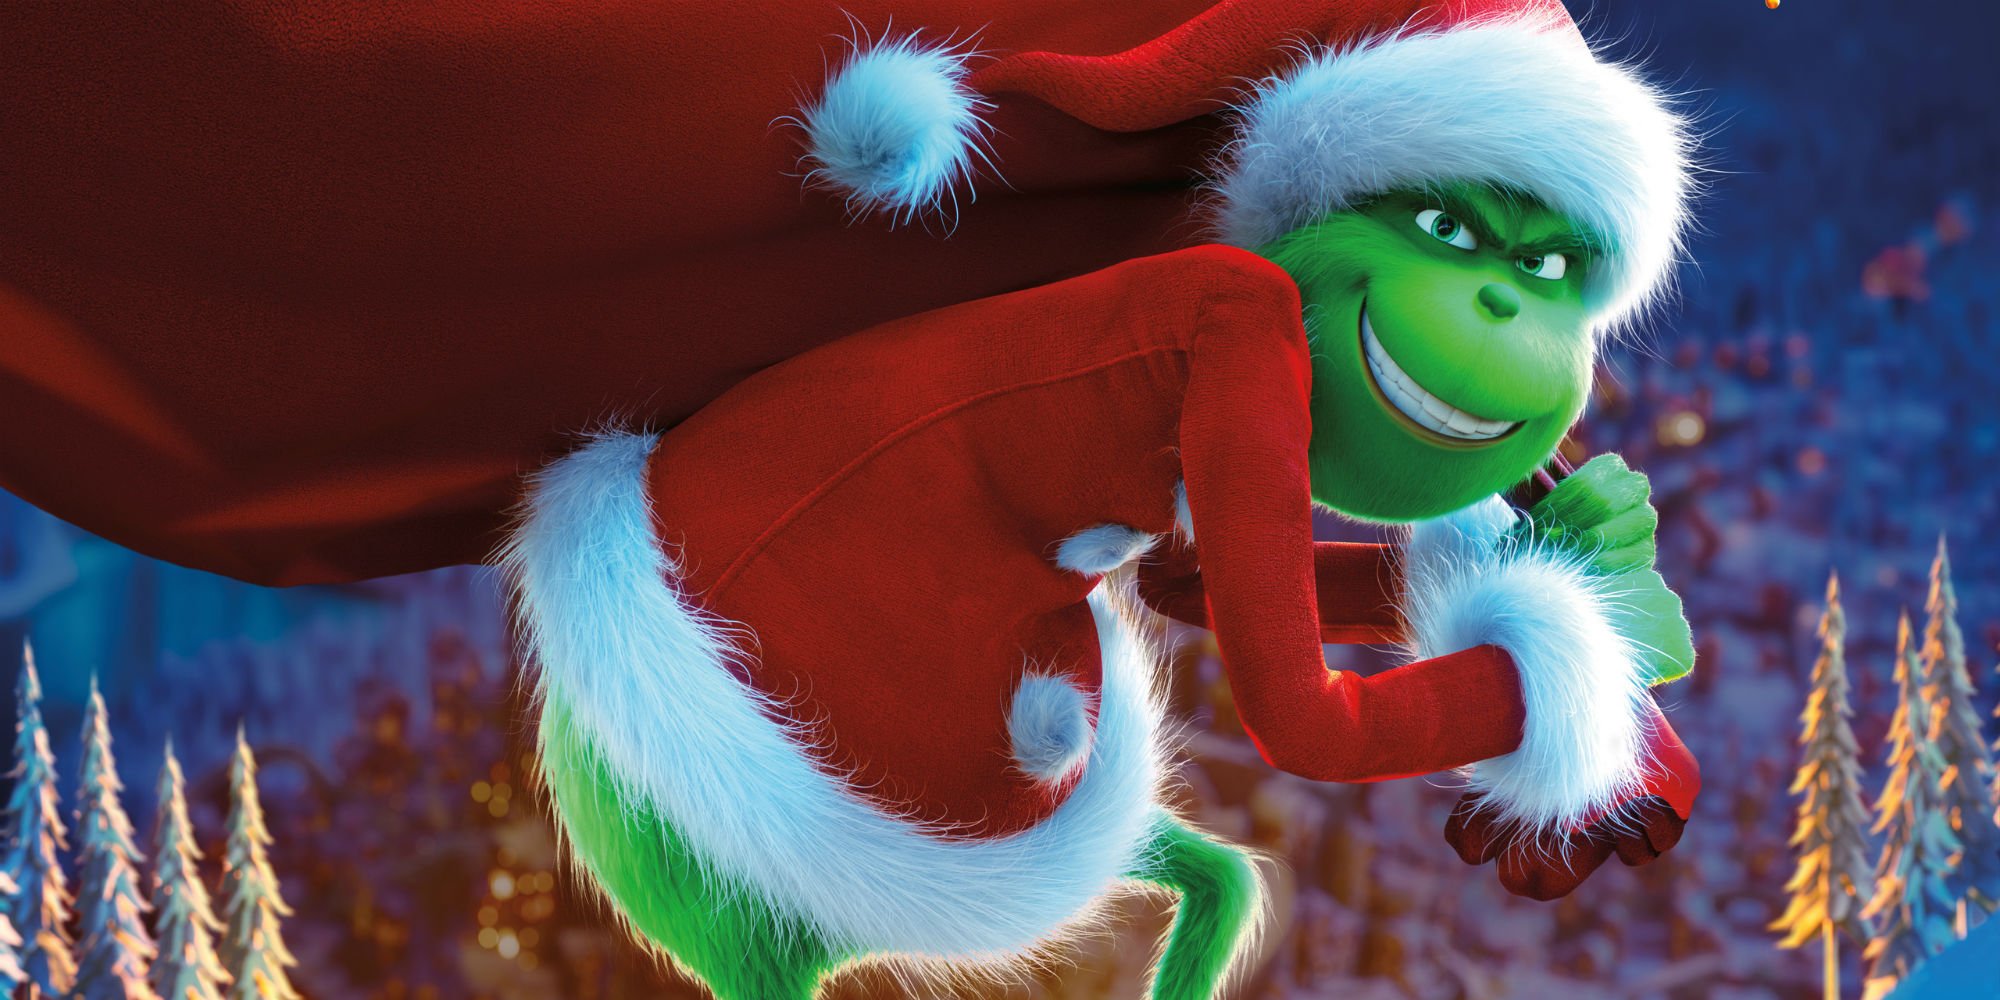 the grinch wallpaper,fur,organism,fictional character,animation,illustration